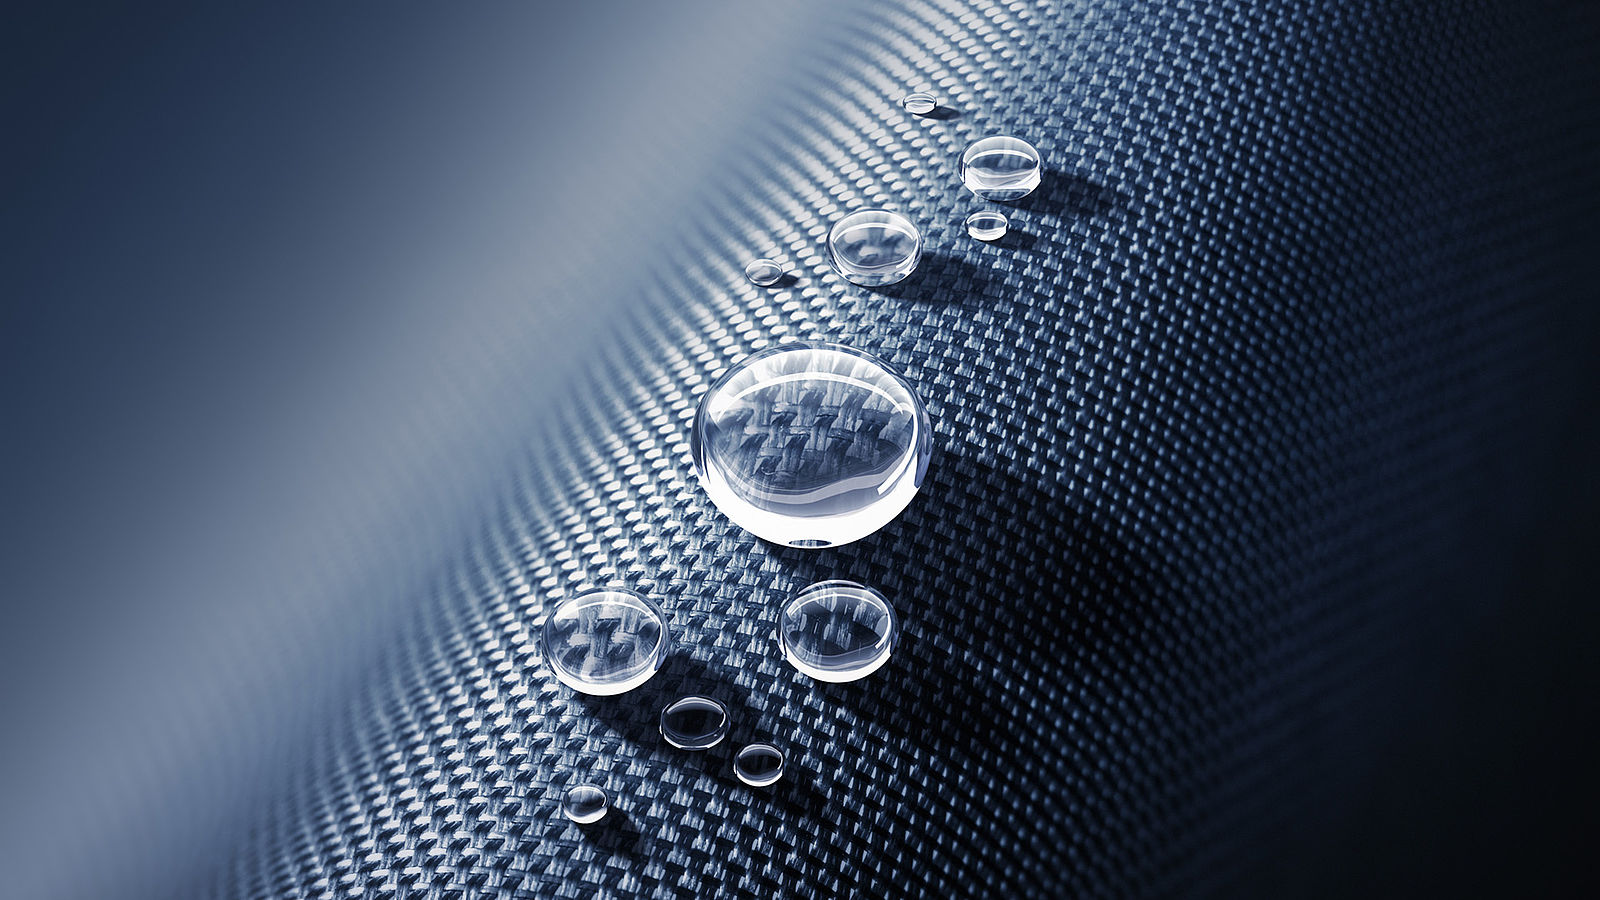 High-tech fabric: The function of the surface and its appearance are important success factors